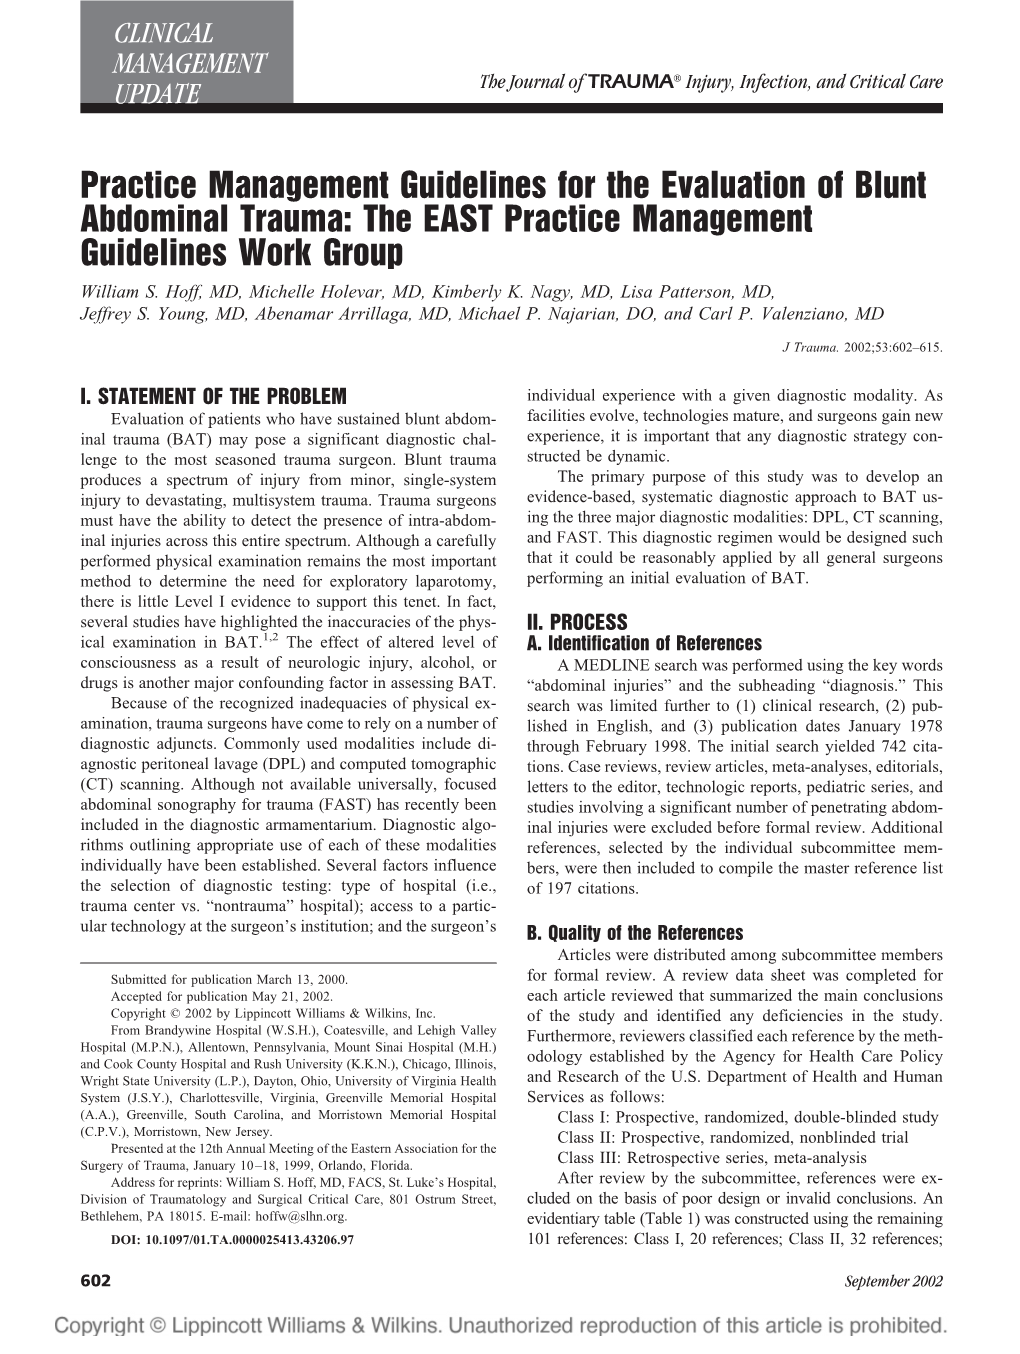 Practice Management Guidelines for the Evaluation of Blunt Abdominal Trauma: the EAST Practice Management Guidelines Work Group William S